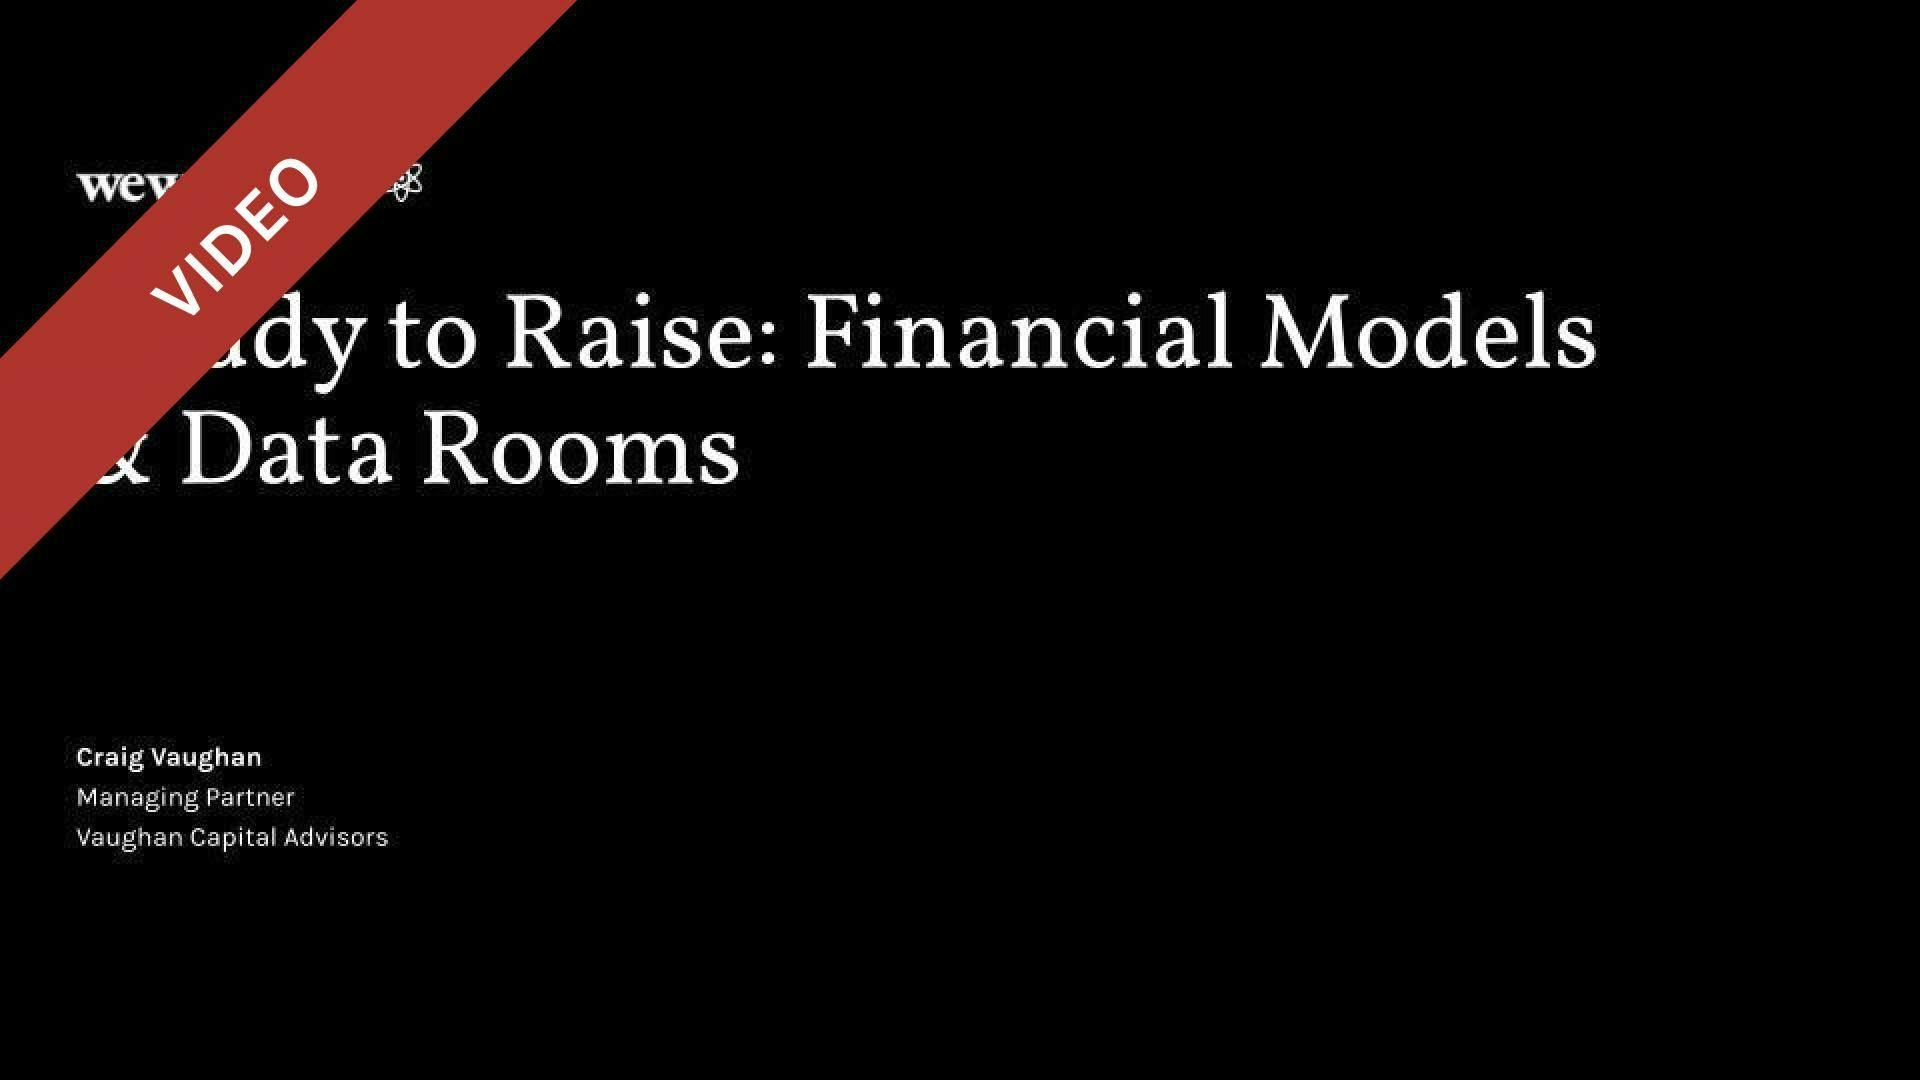 Ready to Raise: Financial Models & Data Rooms